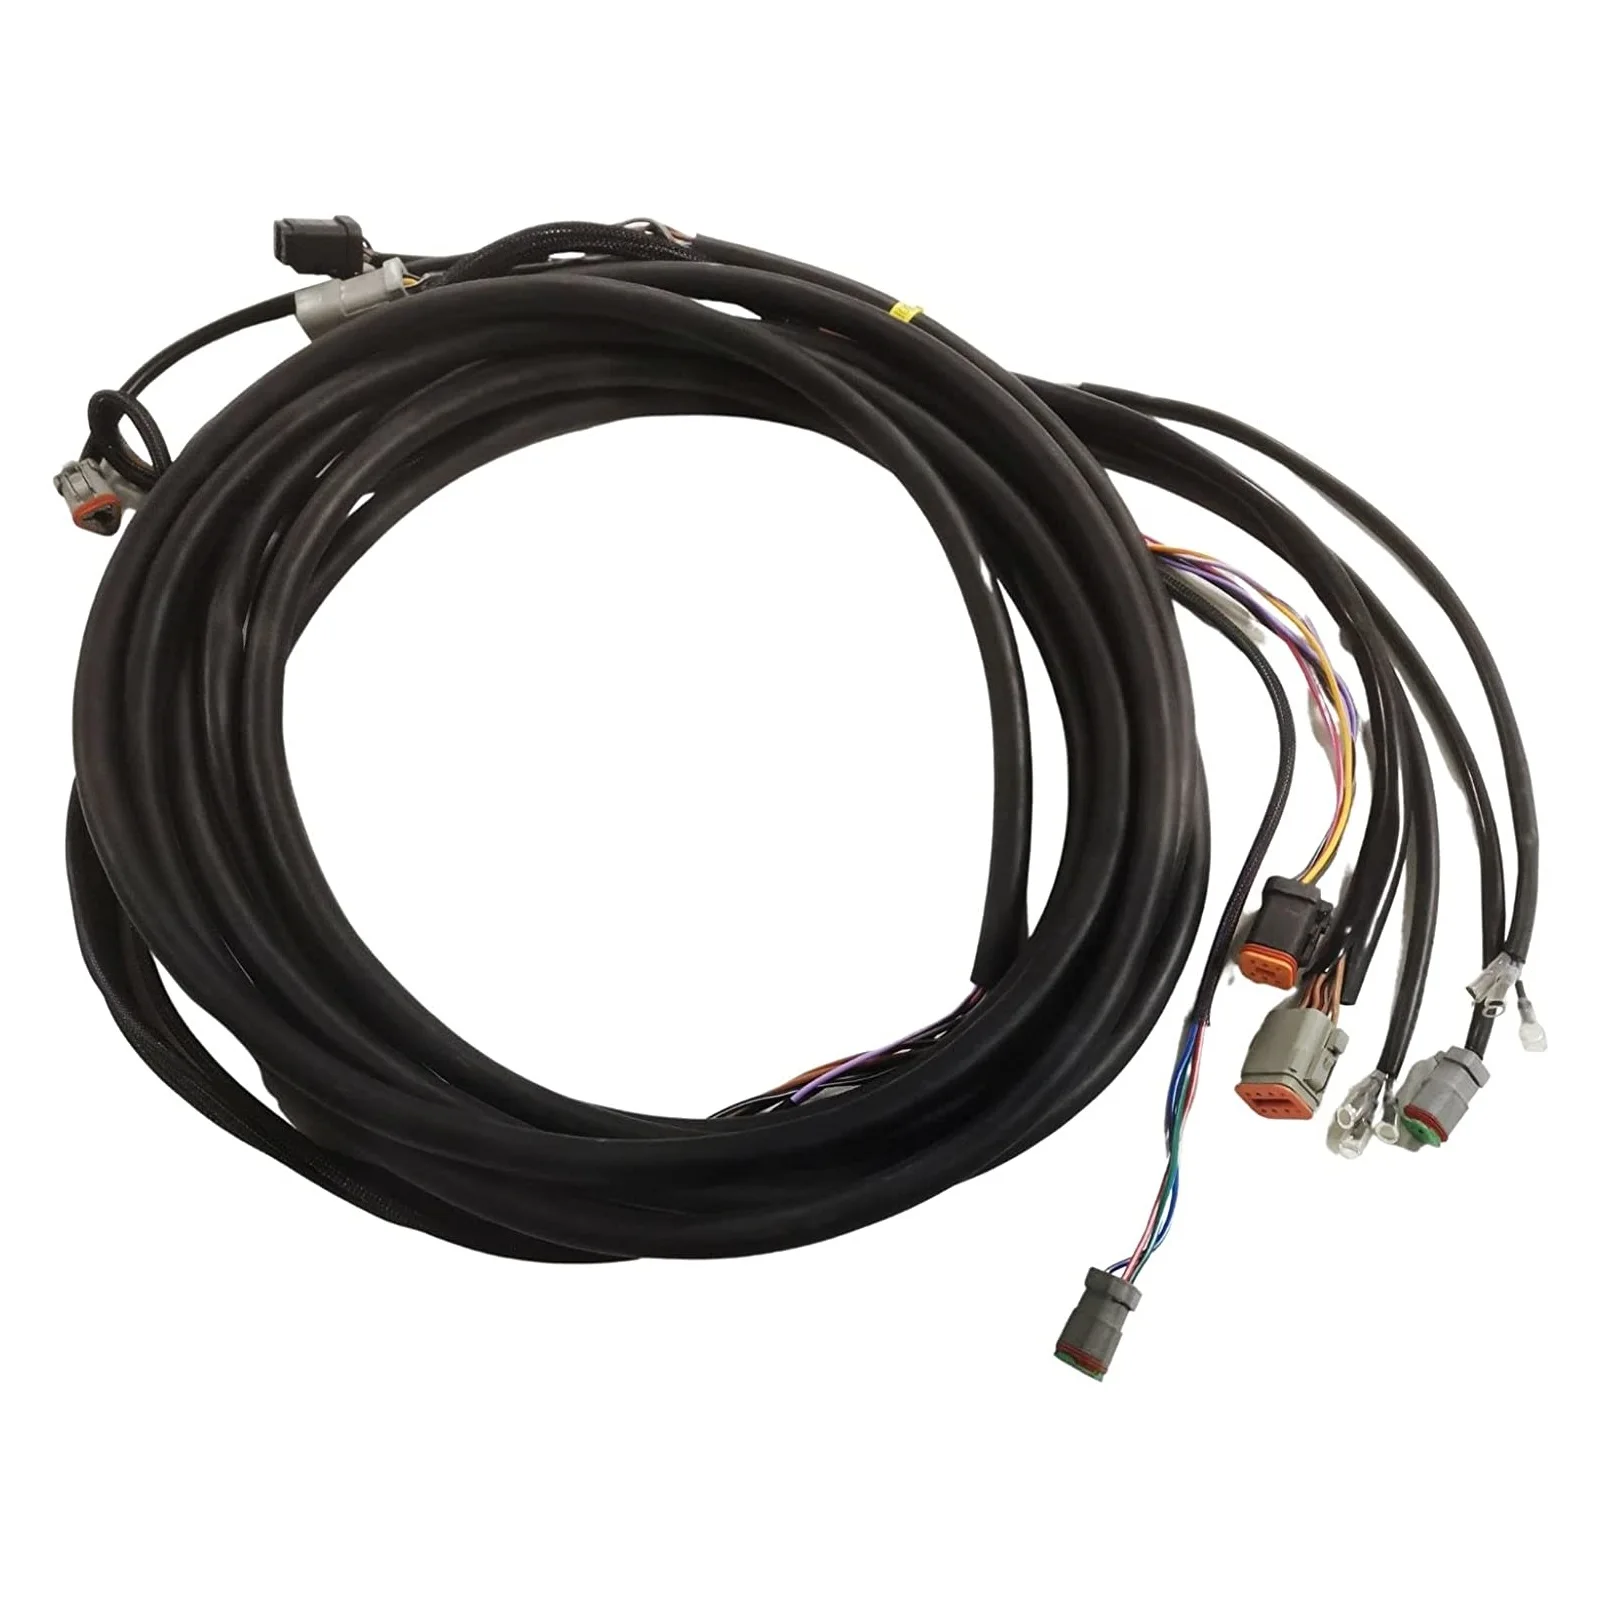 

176340 0176340 New System Check Main Modular Ignition Wiring Harness Cable 15ft for Evinrude Johnson OMC Remote Control boxes